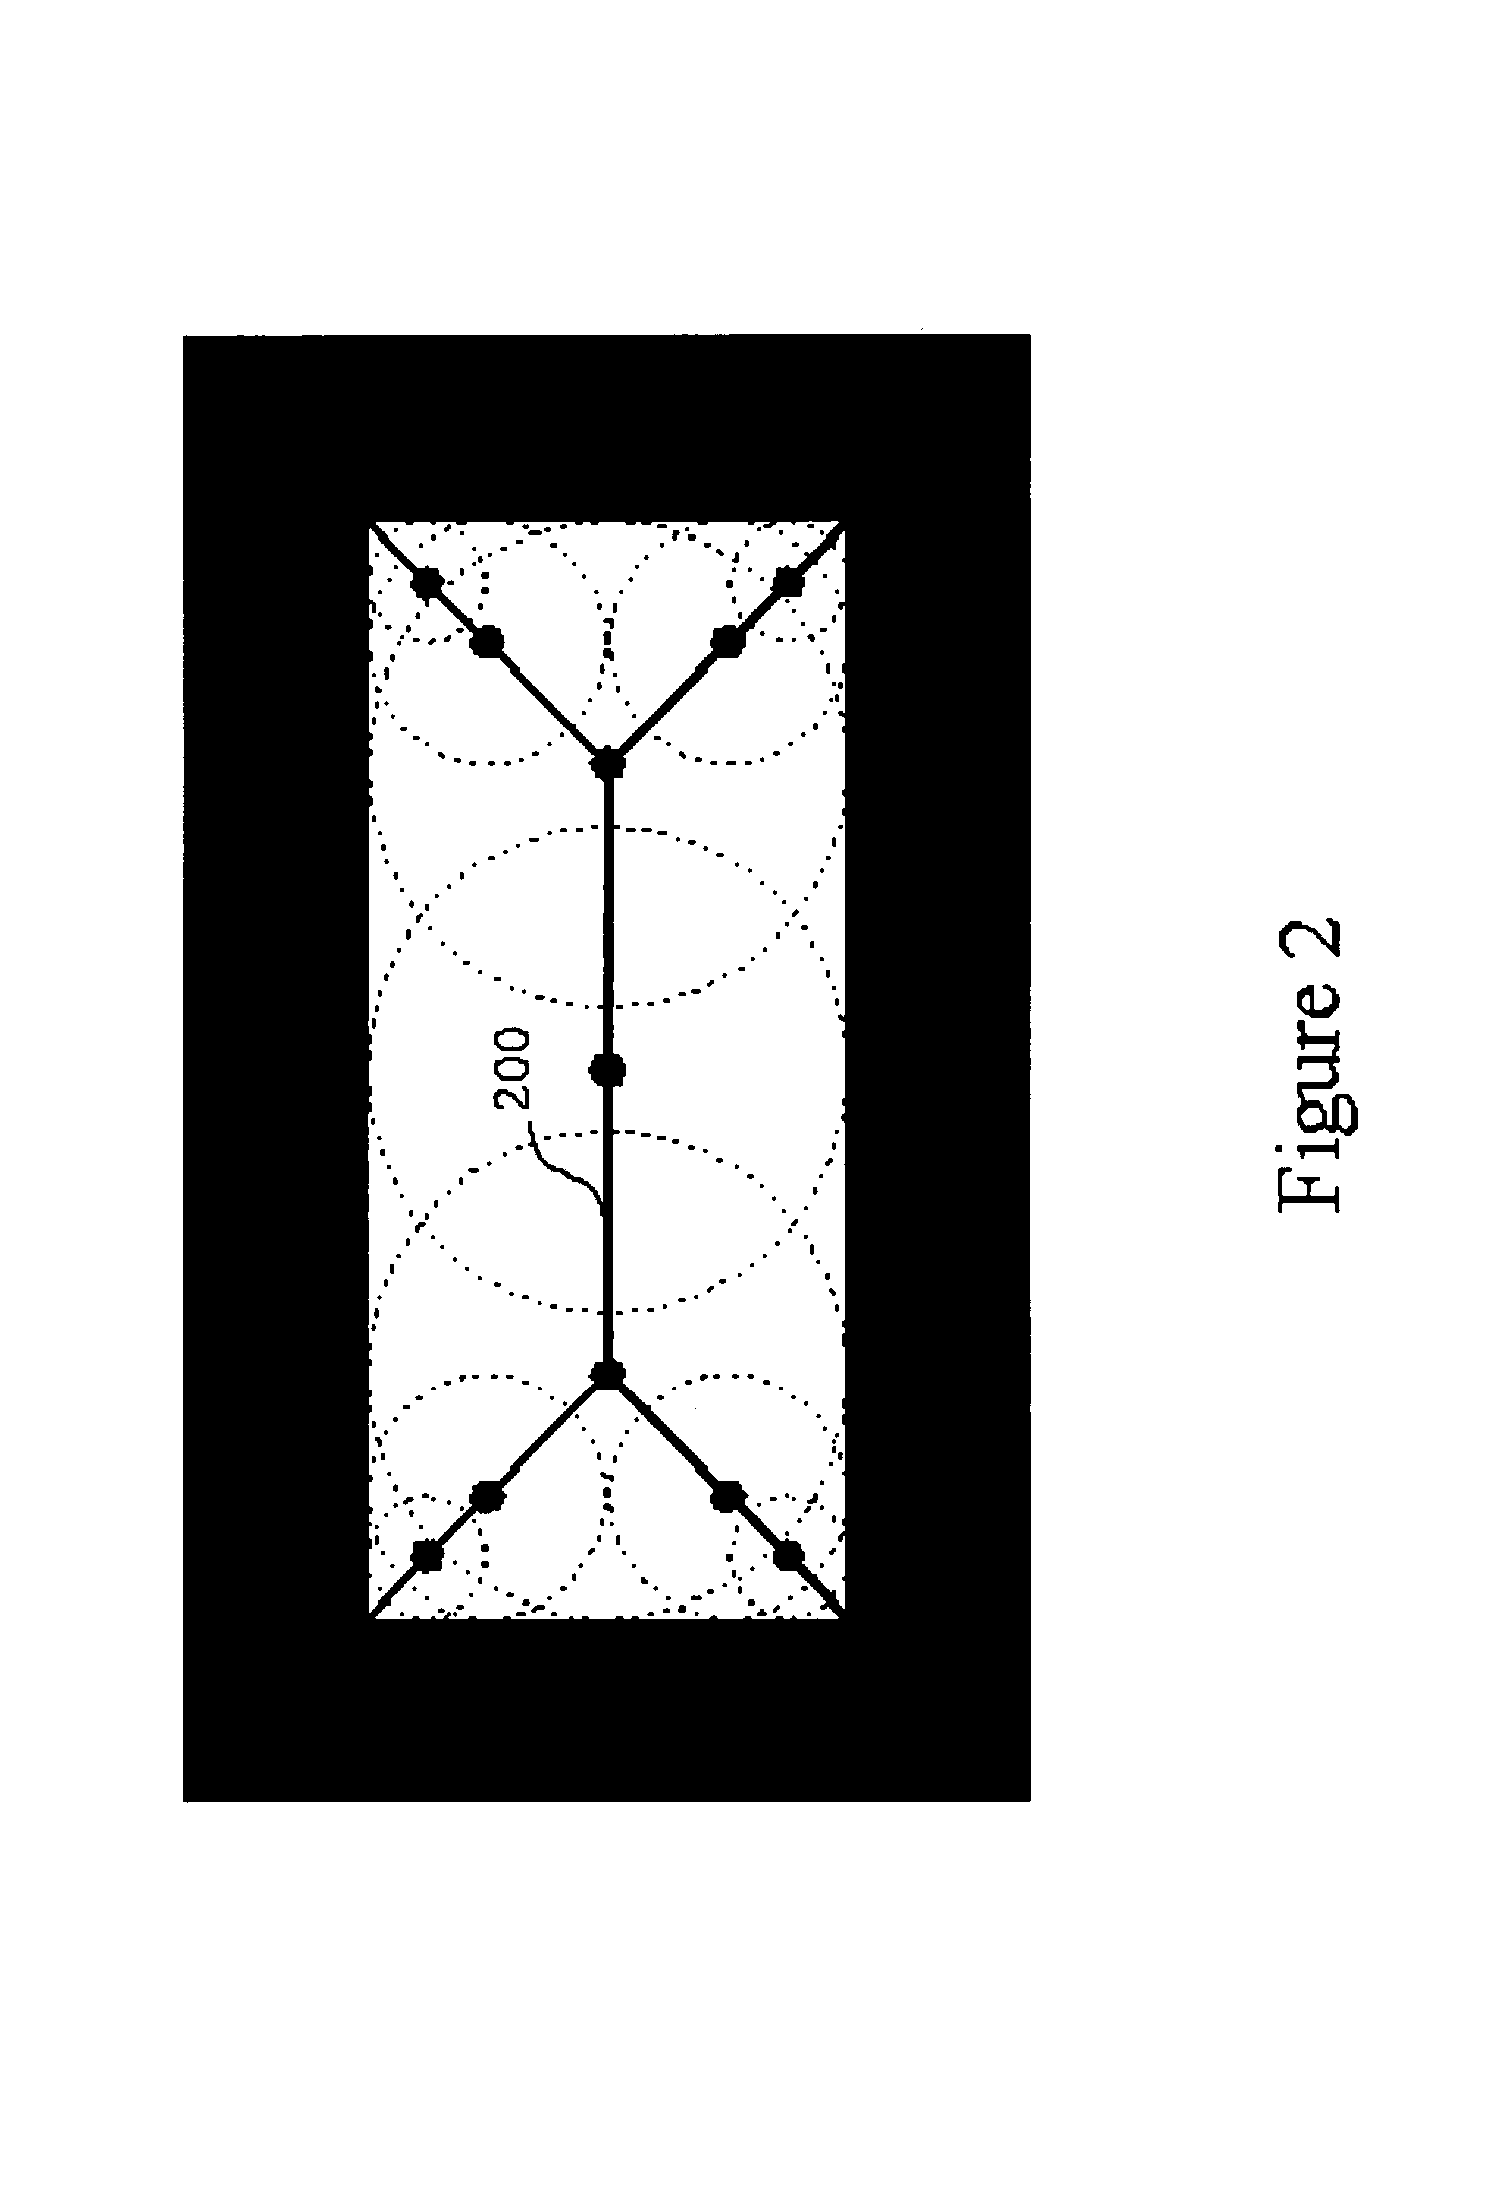 Method for adaptive image region partition and morphologic processing